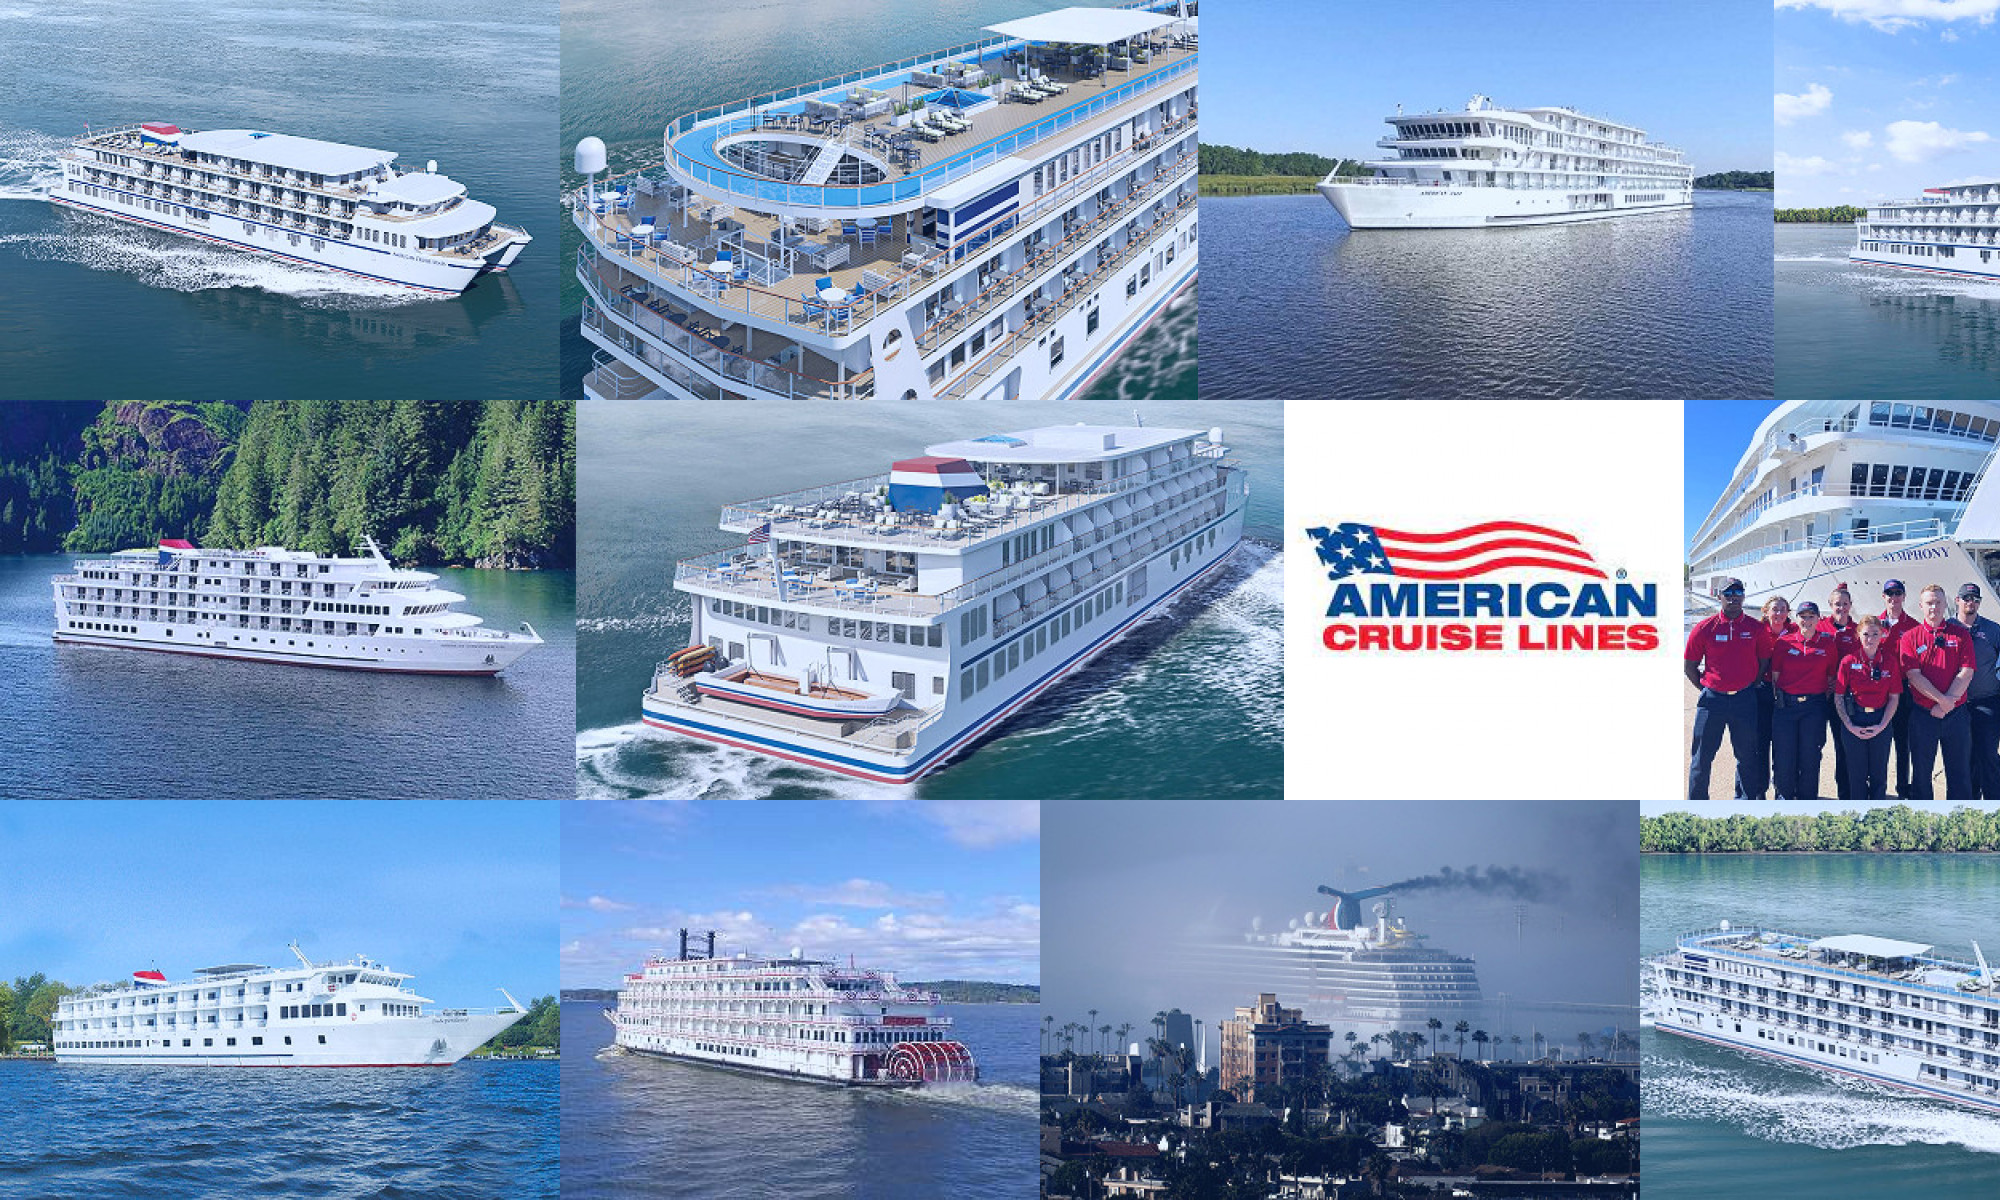 american cruise lines